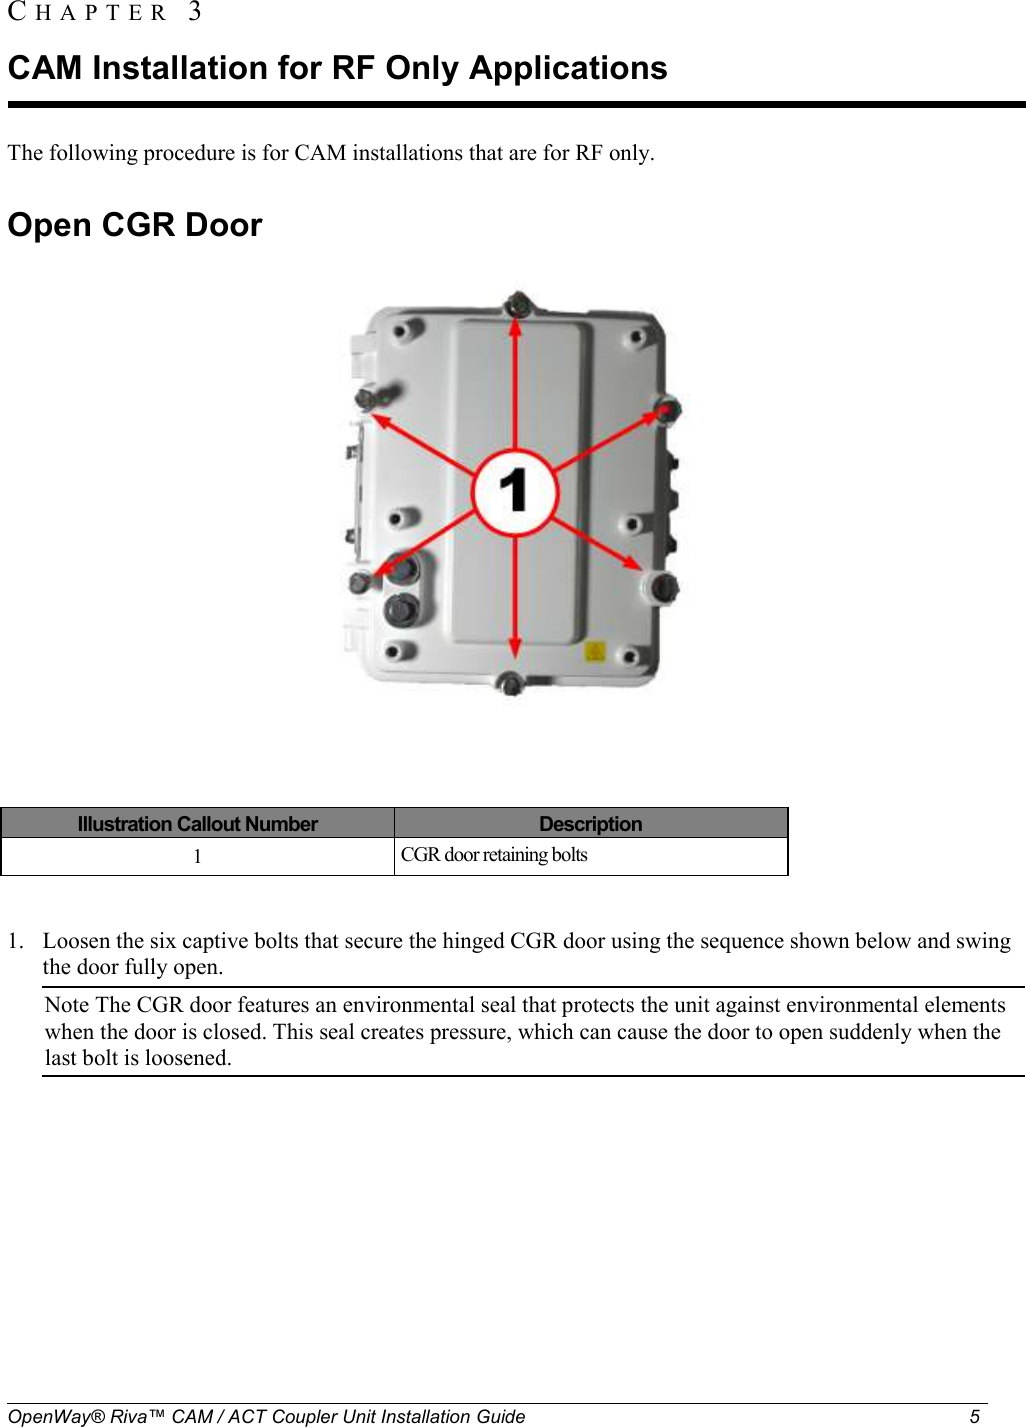  OpenWay® Riva™ CAM / ACT Coupler Unit Installation Guide  5     The following procedure is for CAM installations that are for RF only.  Open CGR Door  Illustration Callout Number  Description 1  CGR door retaining bolts  1. Loosen the six captive bolts that secure the hinged CGR door using the sequence shown below and swing the door fully open. Note The CGR door features an environmental seal that protects the unit against environmental elements when the door is closed. This seal creates pressure, which can cause the door to open suddenly when the last bolt is loosened. CH A P T E R  3  CAM Installation for RF Only Applications 